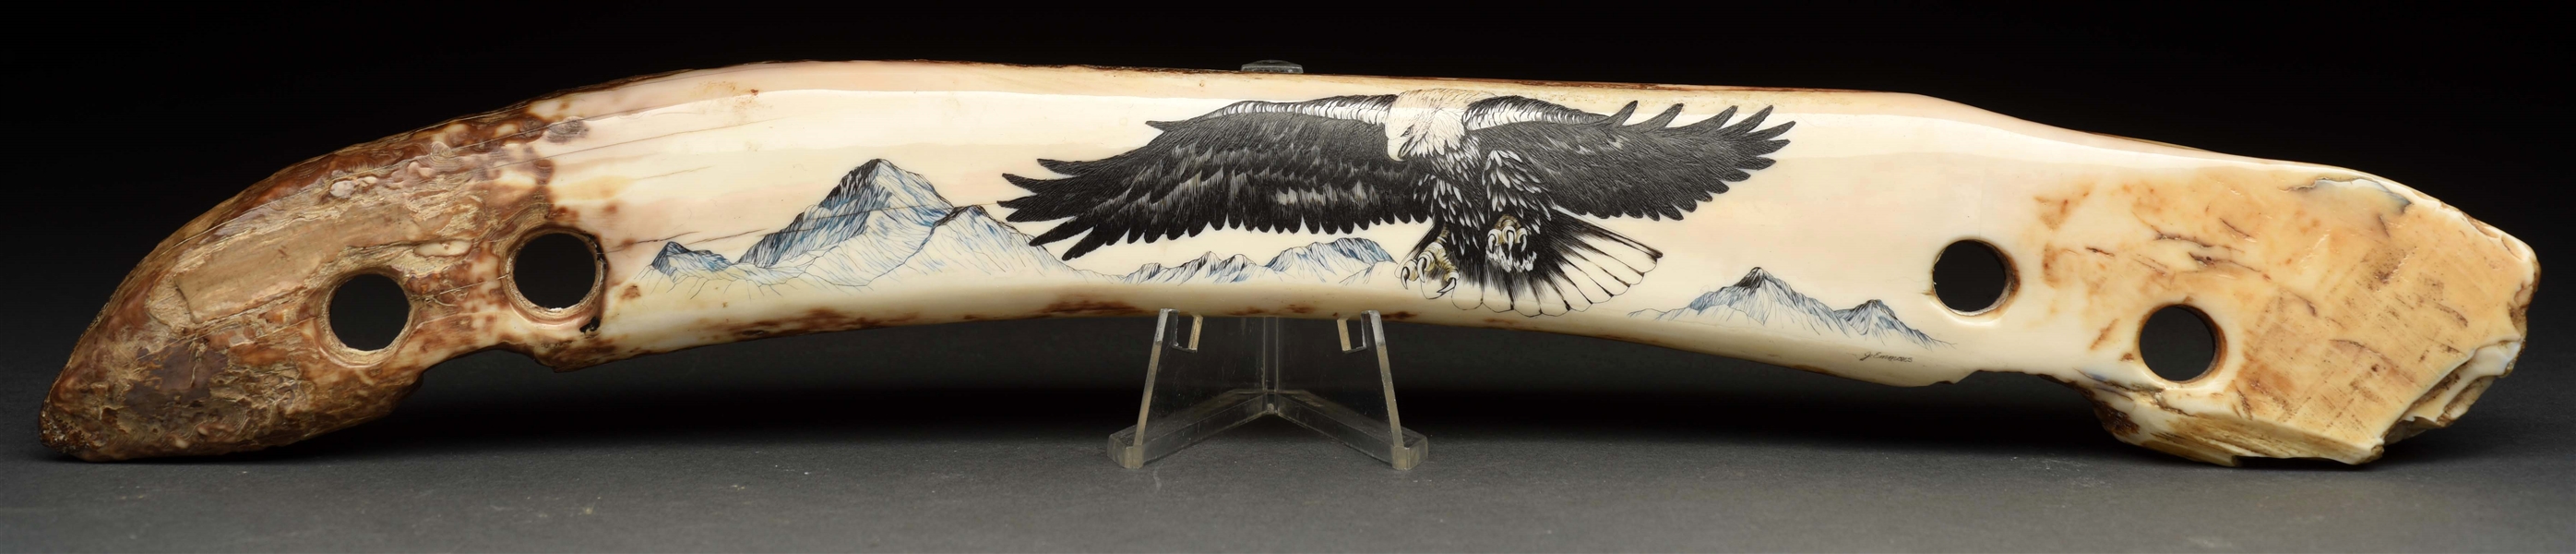 SCRIMSHAW OF EAGLE ON IVORY WITH 4 HOLES FOR PENS. 